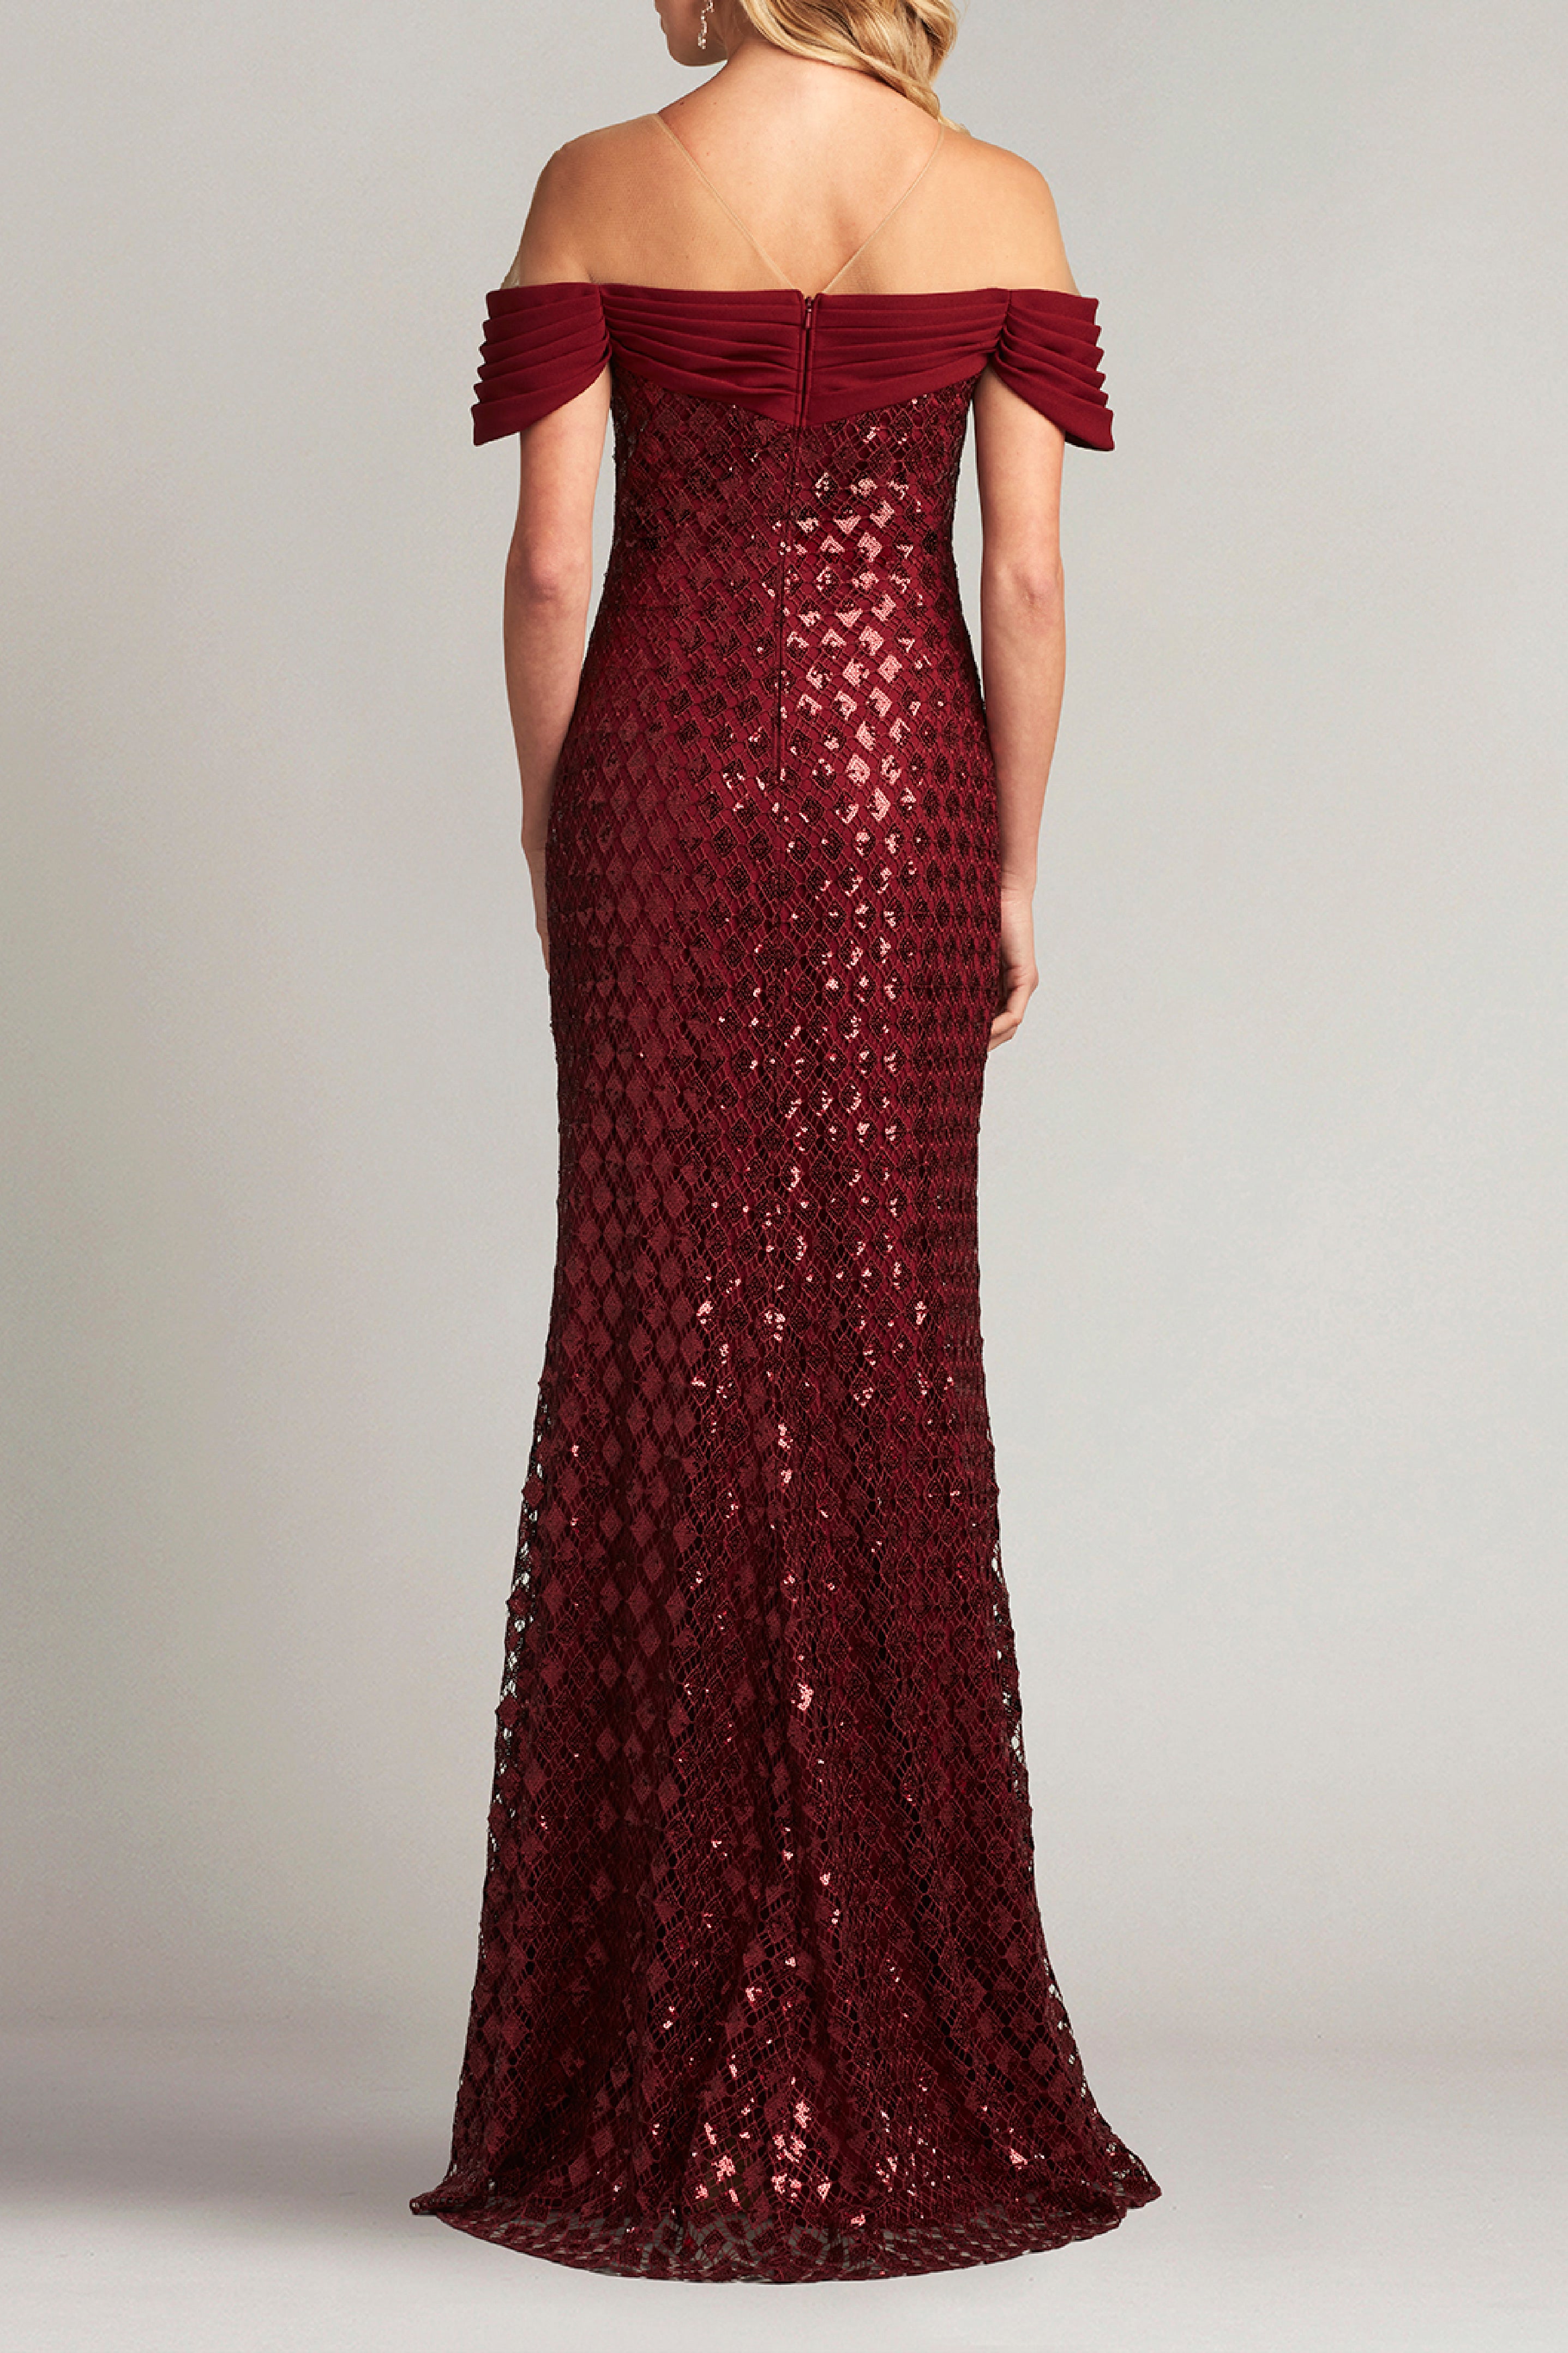 Sequin Lace Illusion Gown